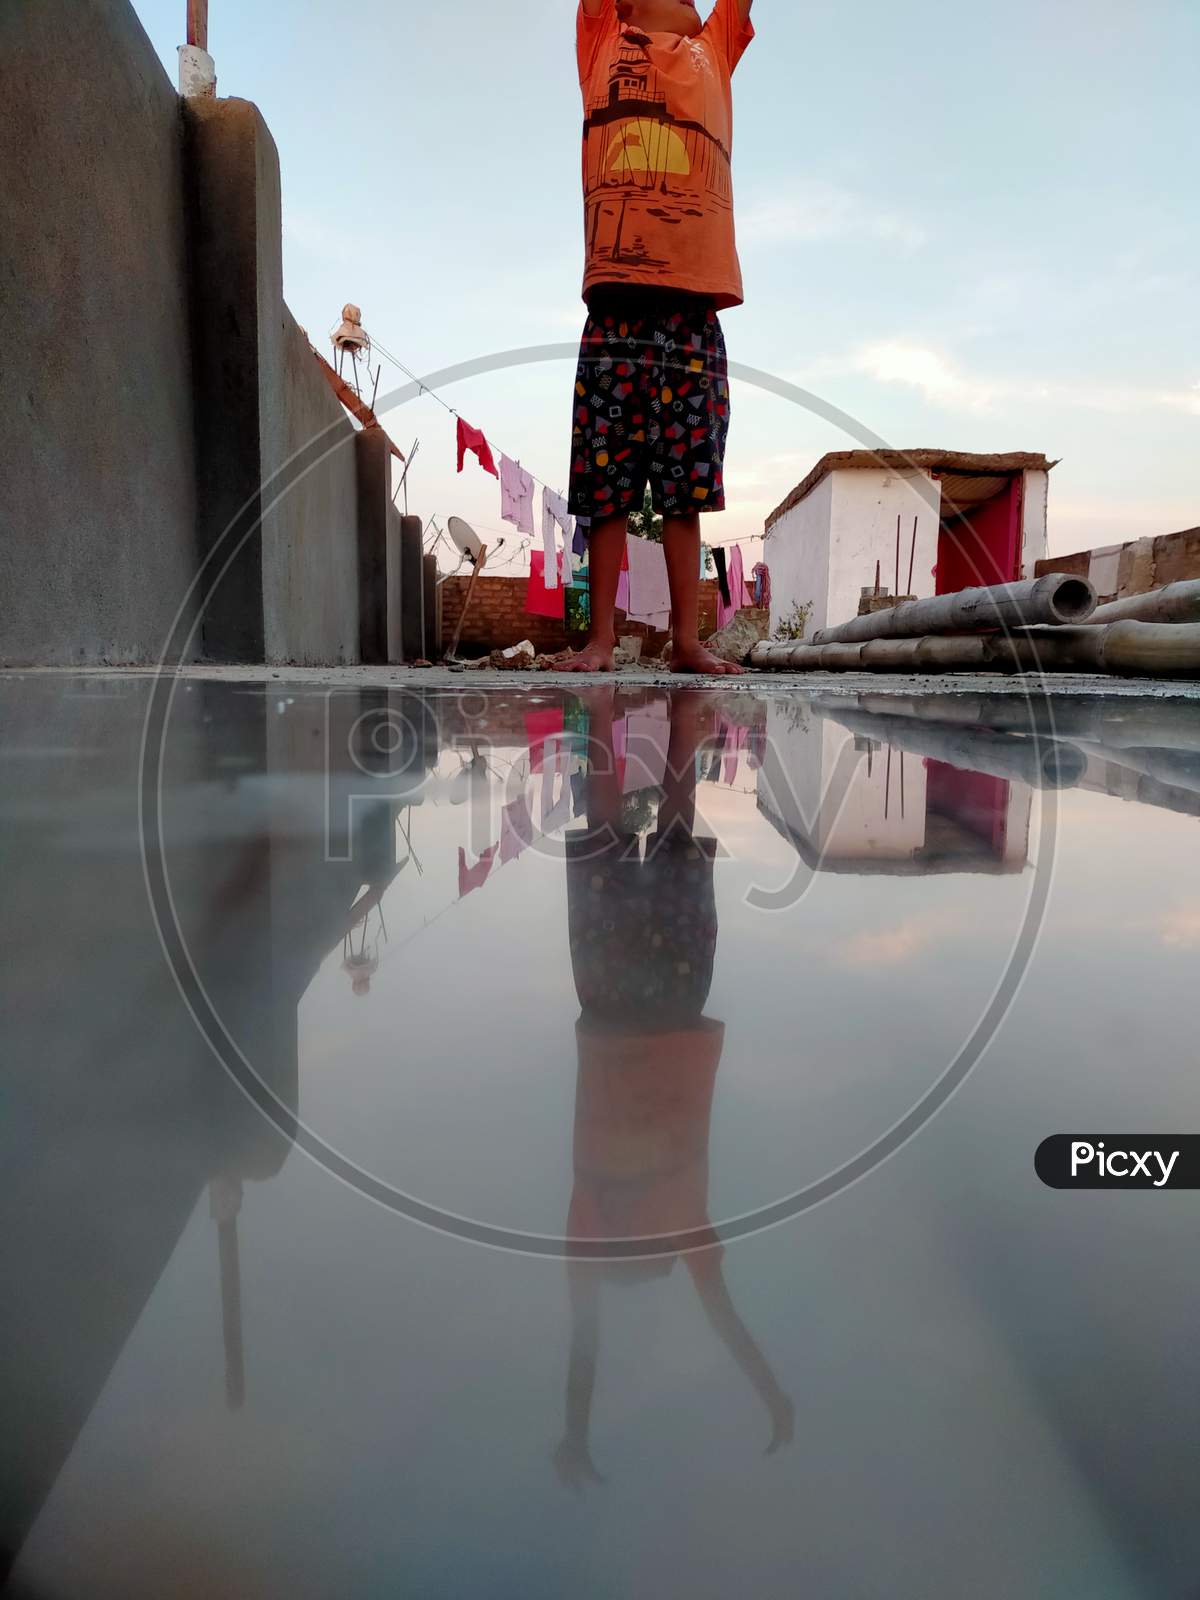 Reflection of a child in water